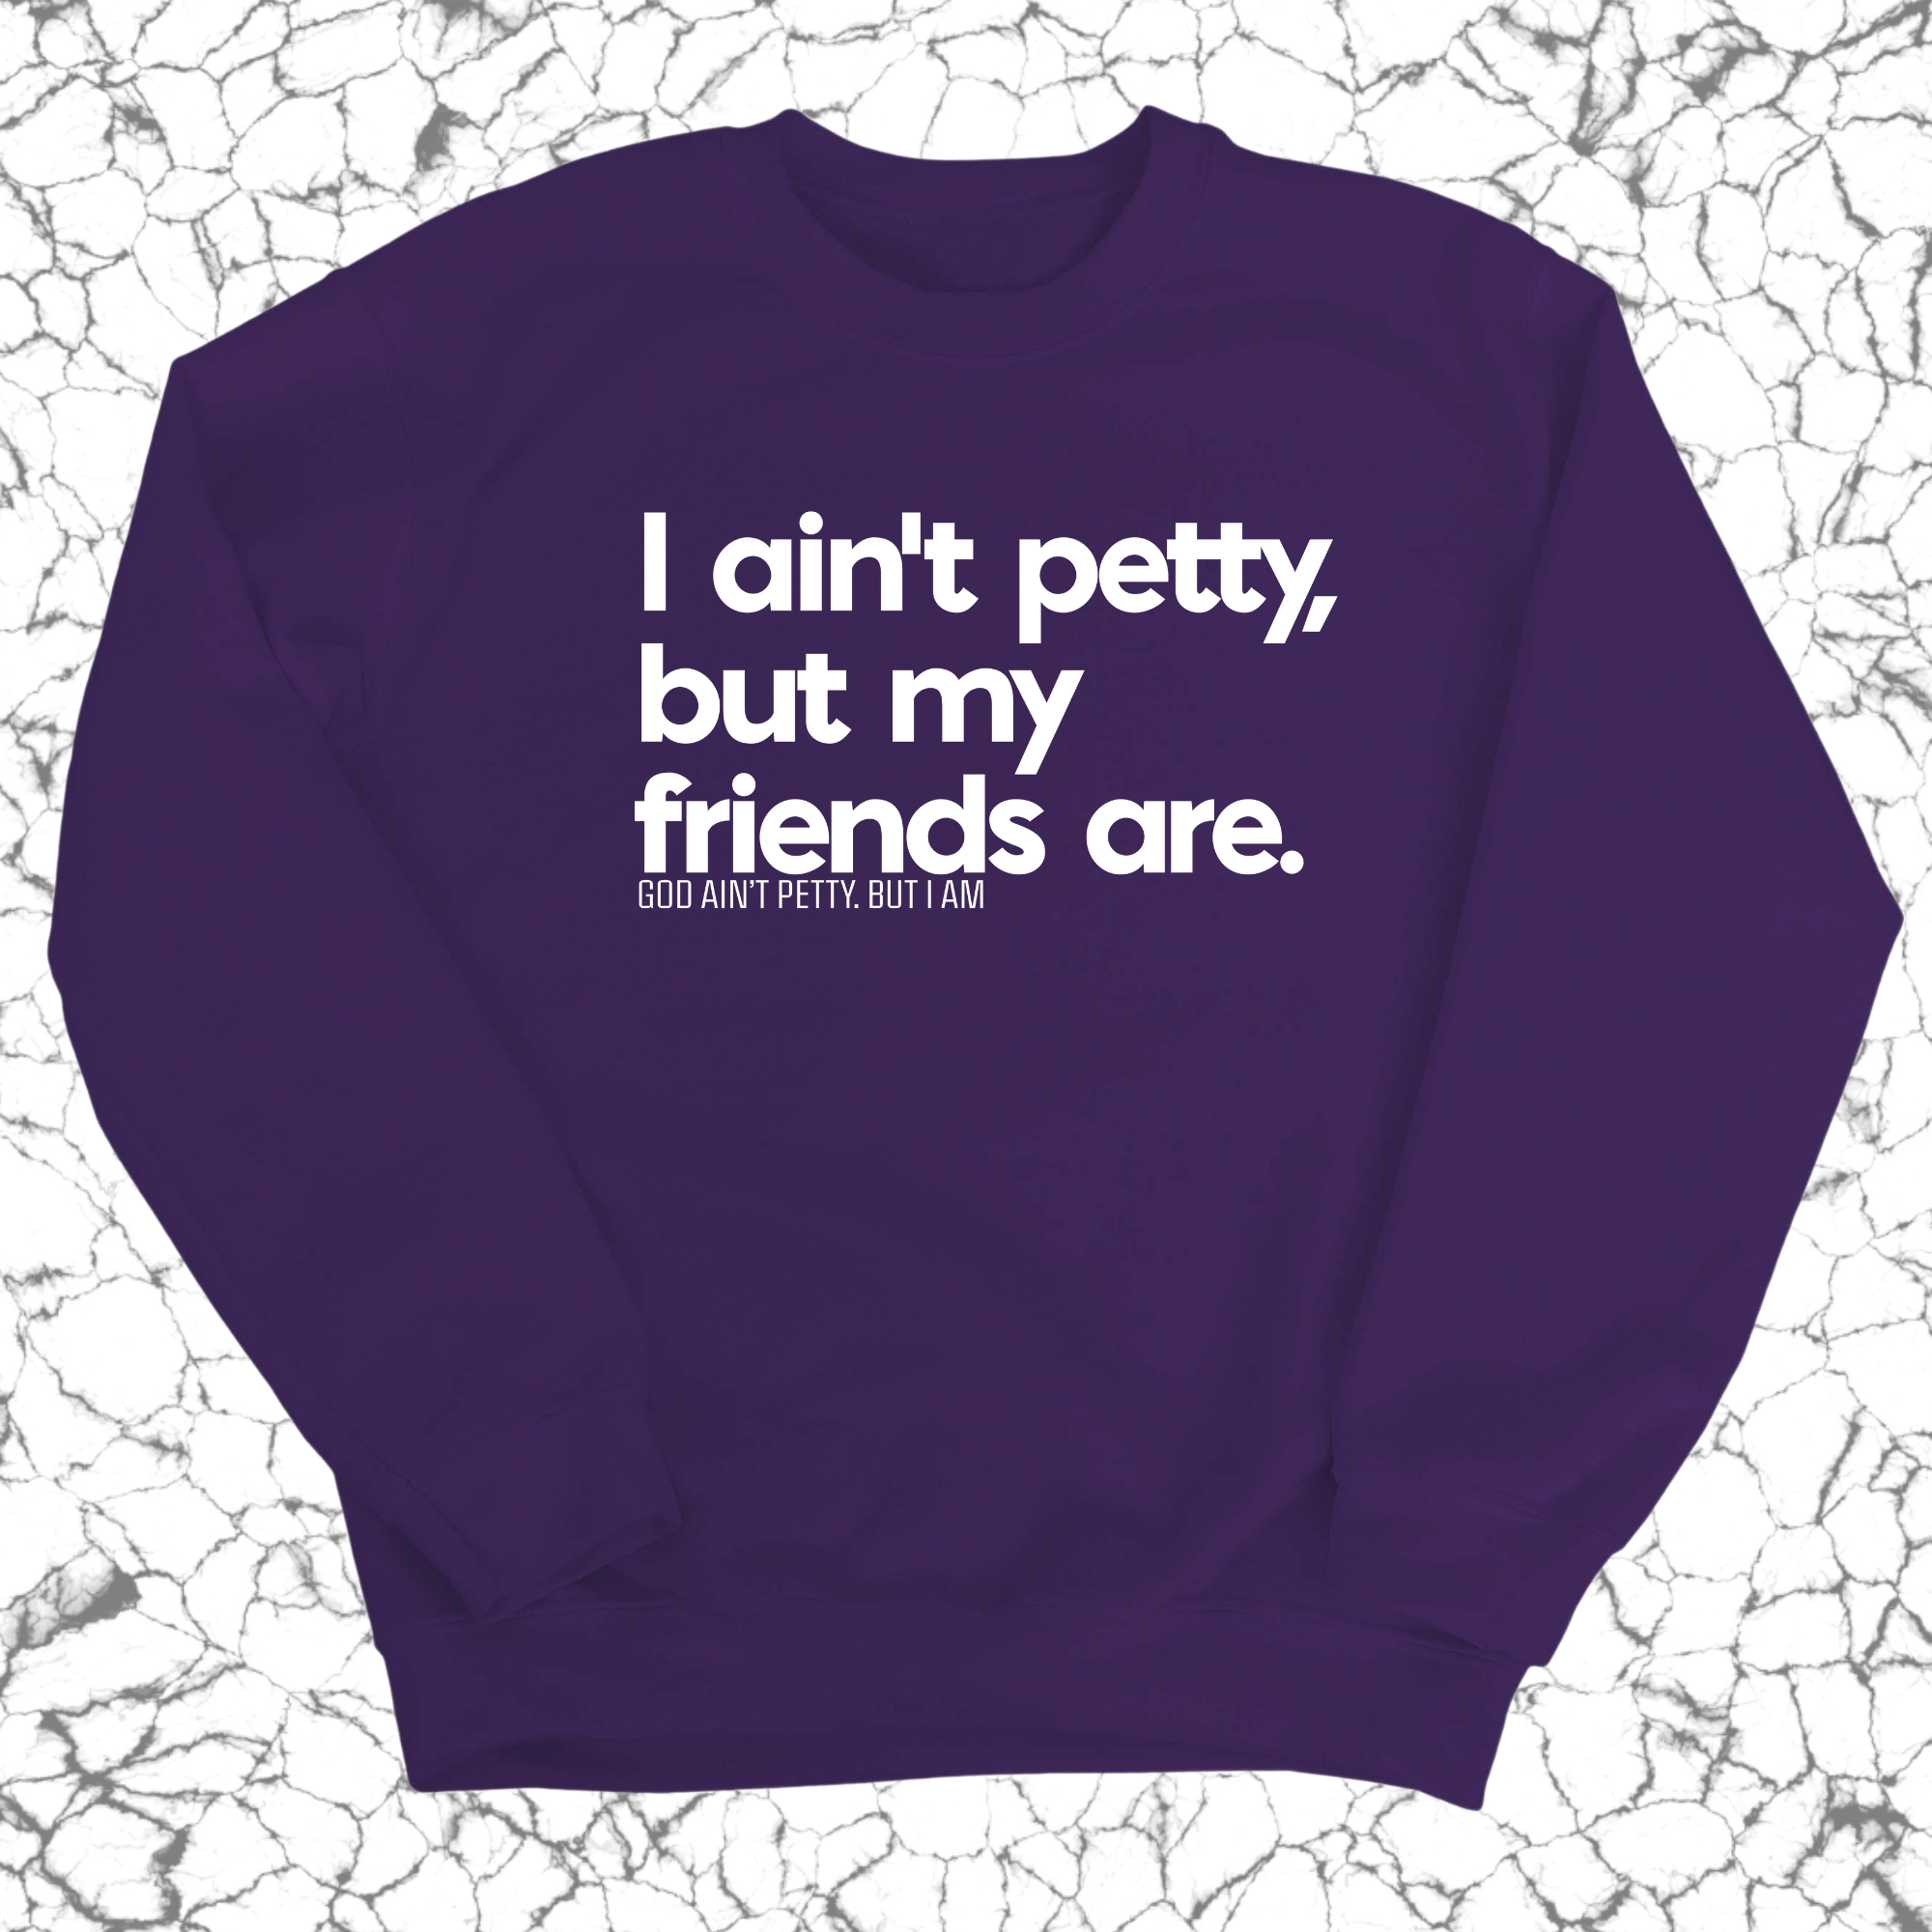 I ain't petty, but my friends are Unisex Sweatshirt-Sweatshirt-The Original God Ain't Petty But I Am